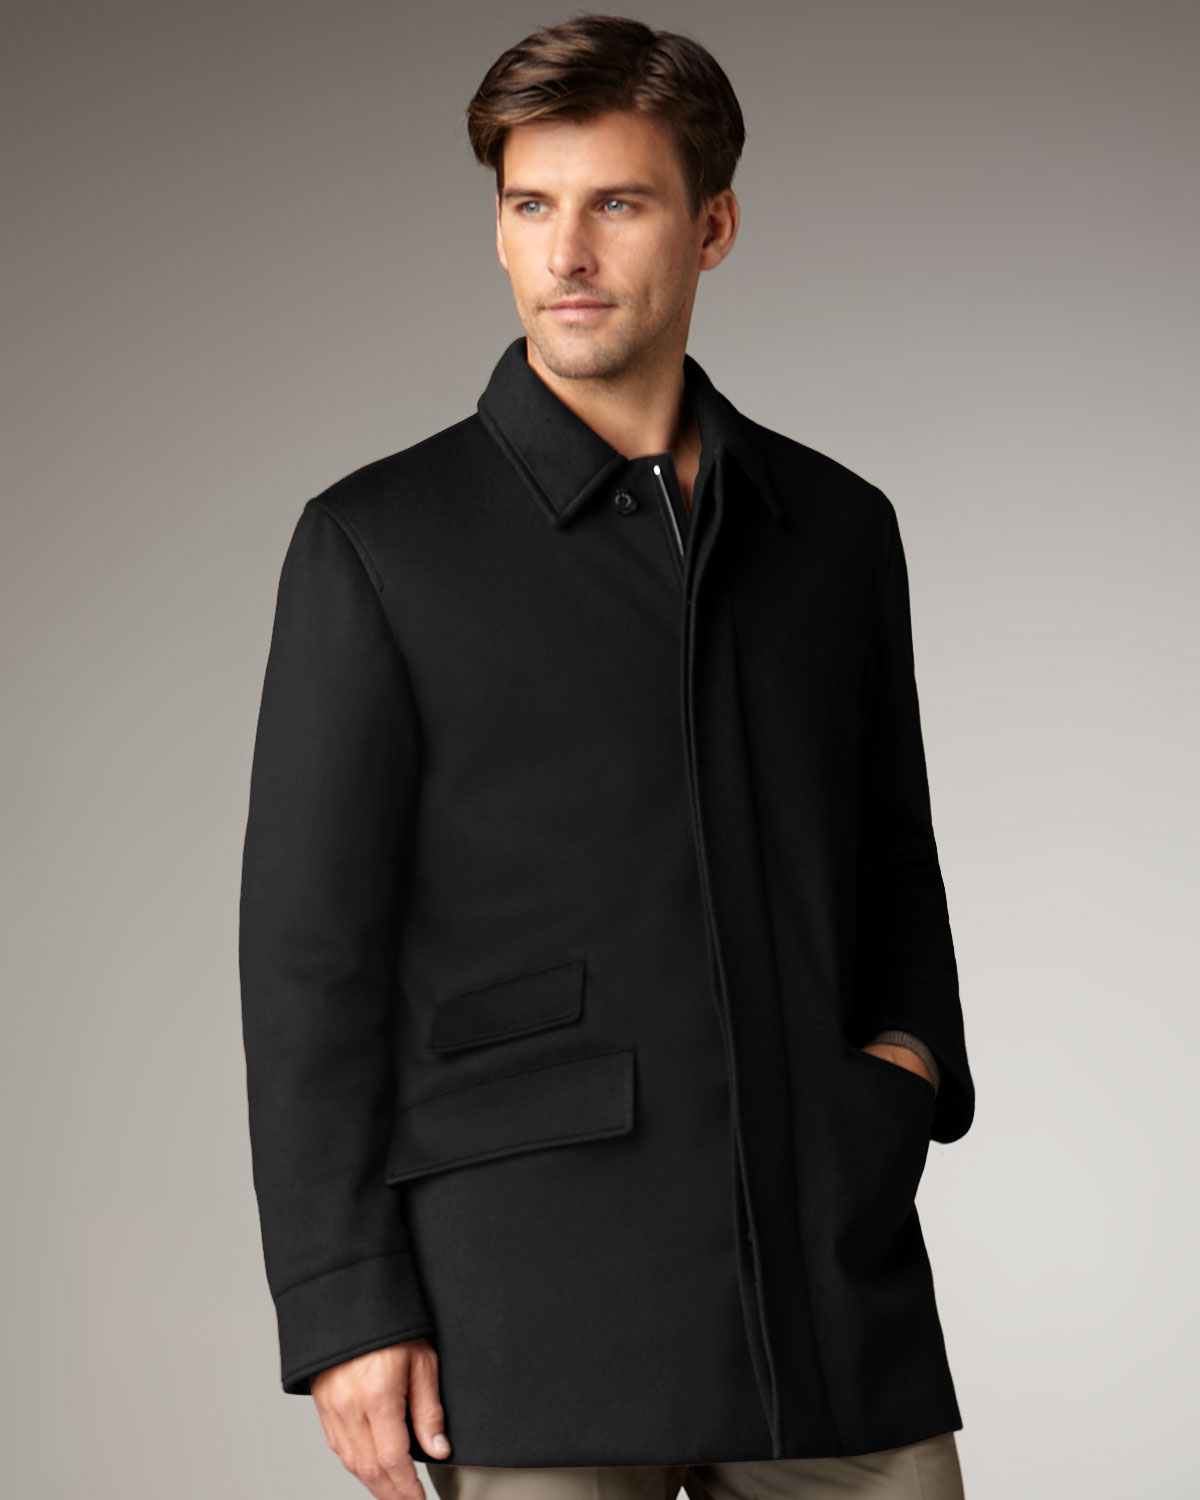 Lyst - Loro piana Anytime Cashmere Storm System Jacket in Black for Men